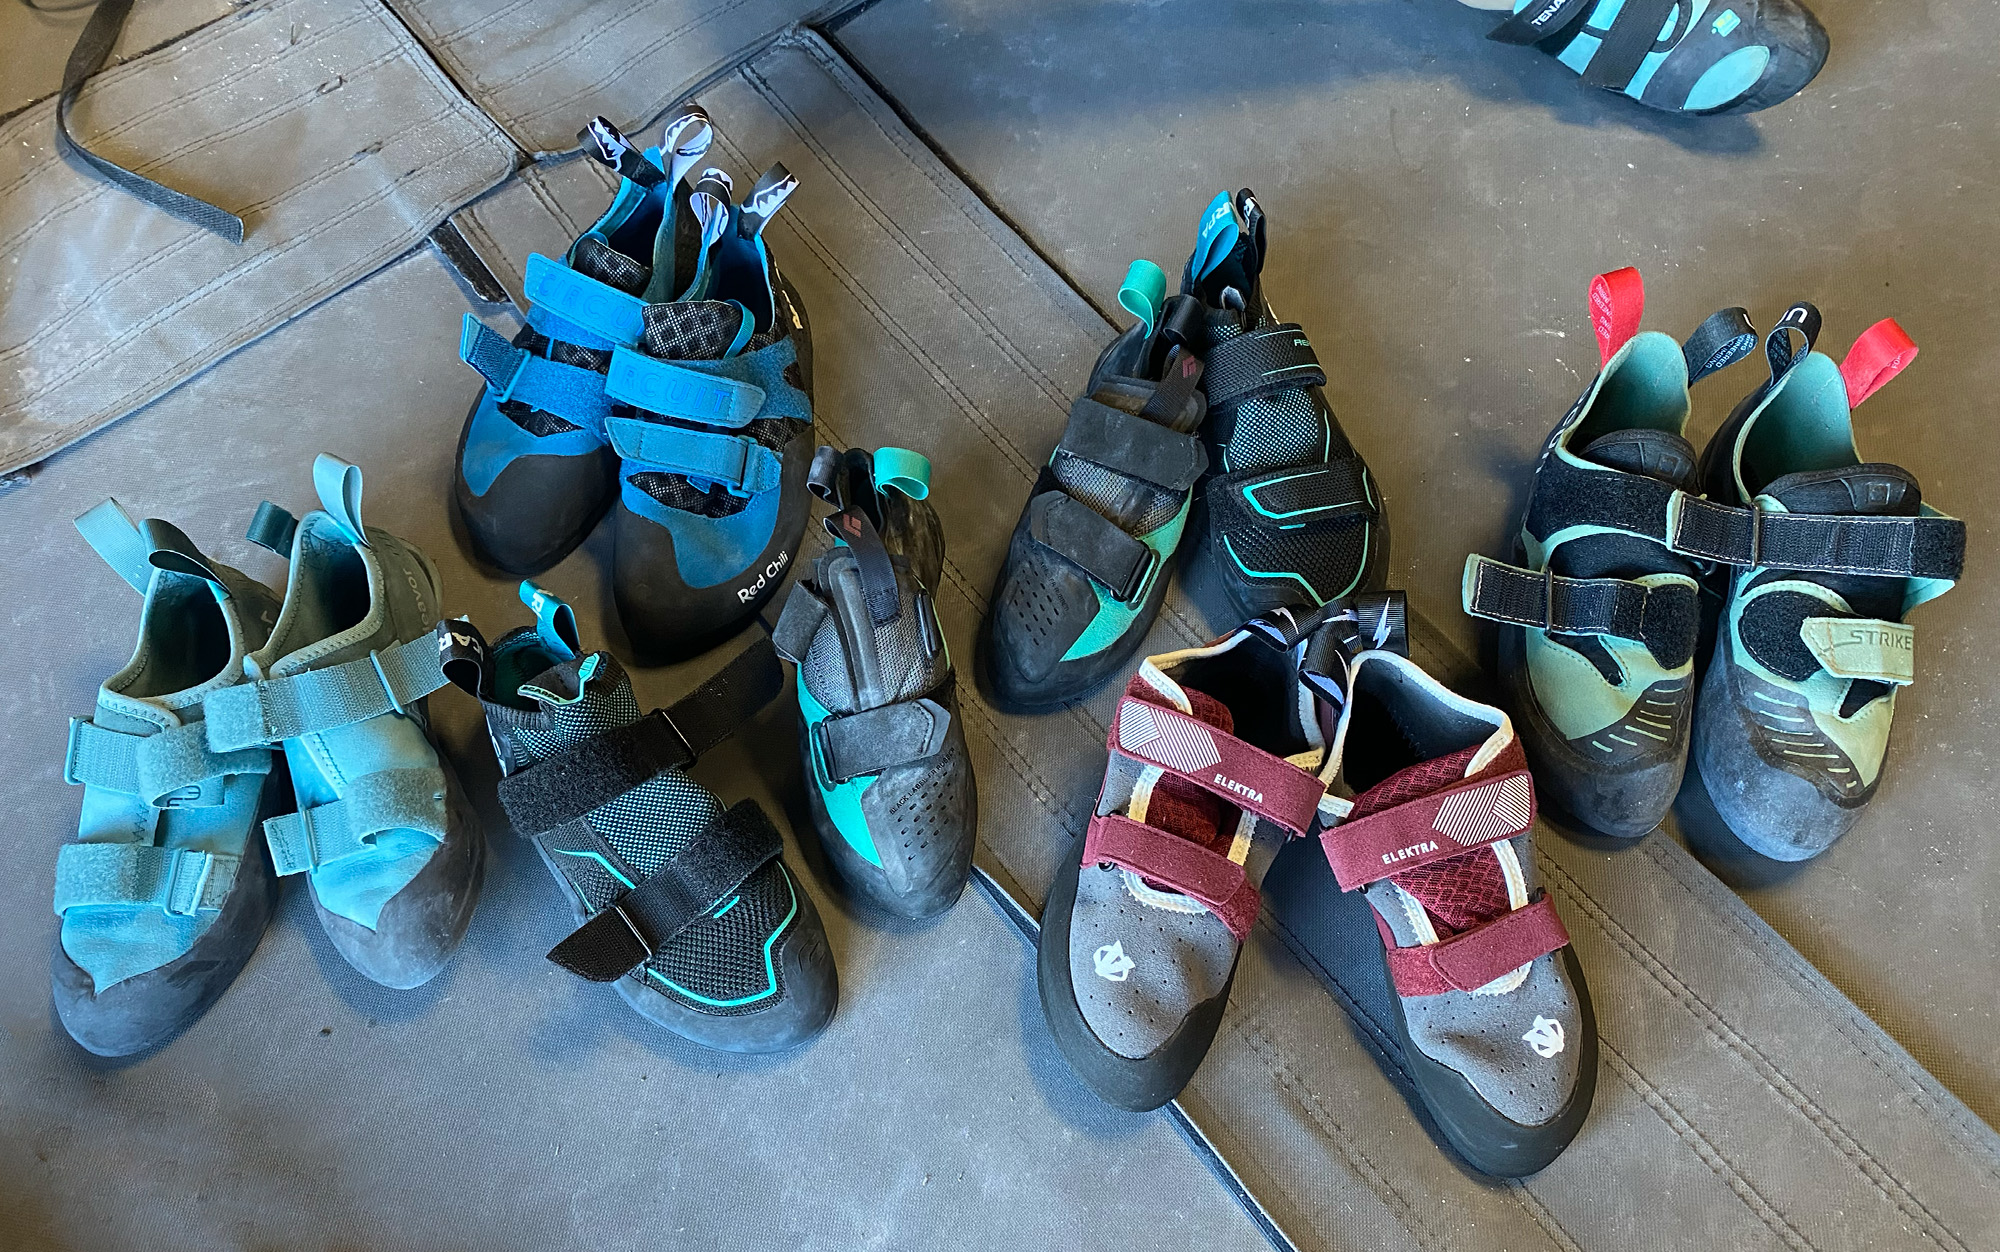 The best beginner climbing shoes sit in a pile.